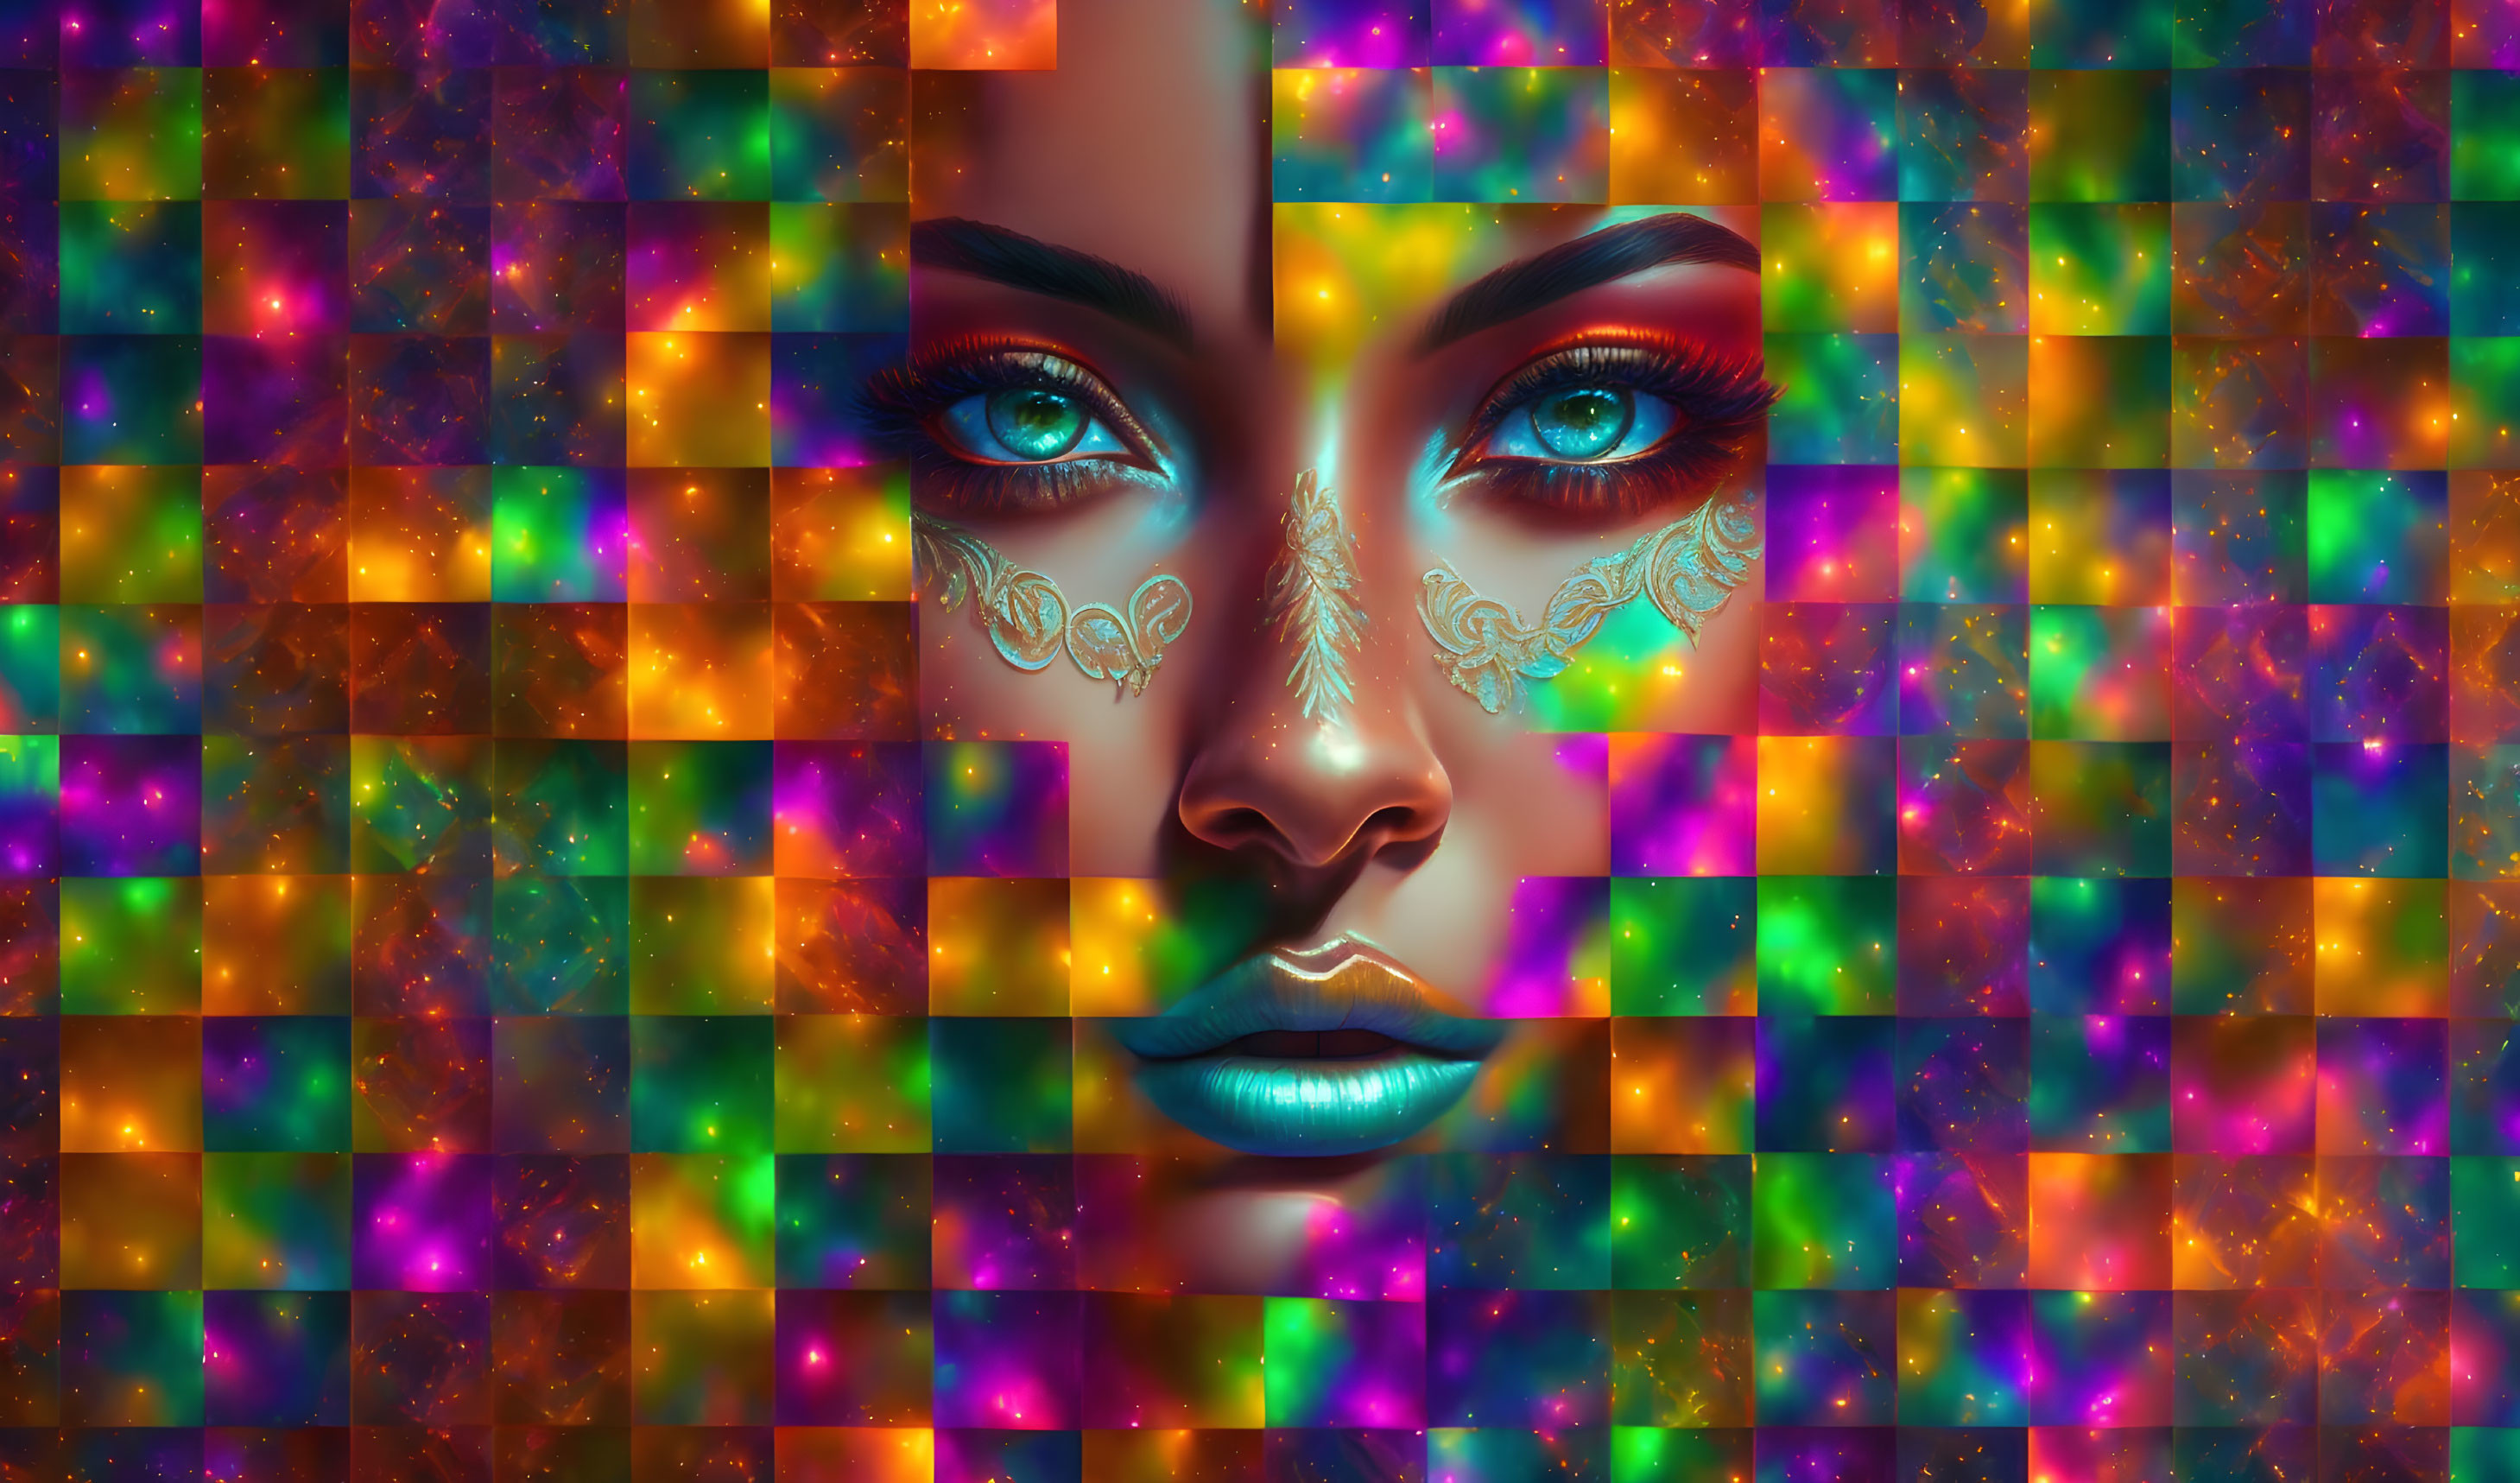 Vibrant blue-eyed woman with golden face art in colorful digital artwork